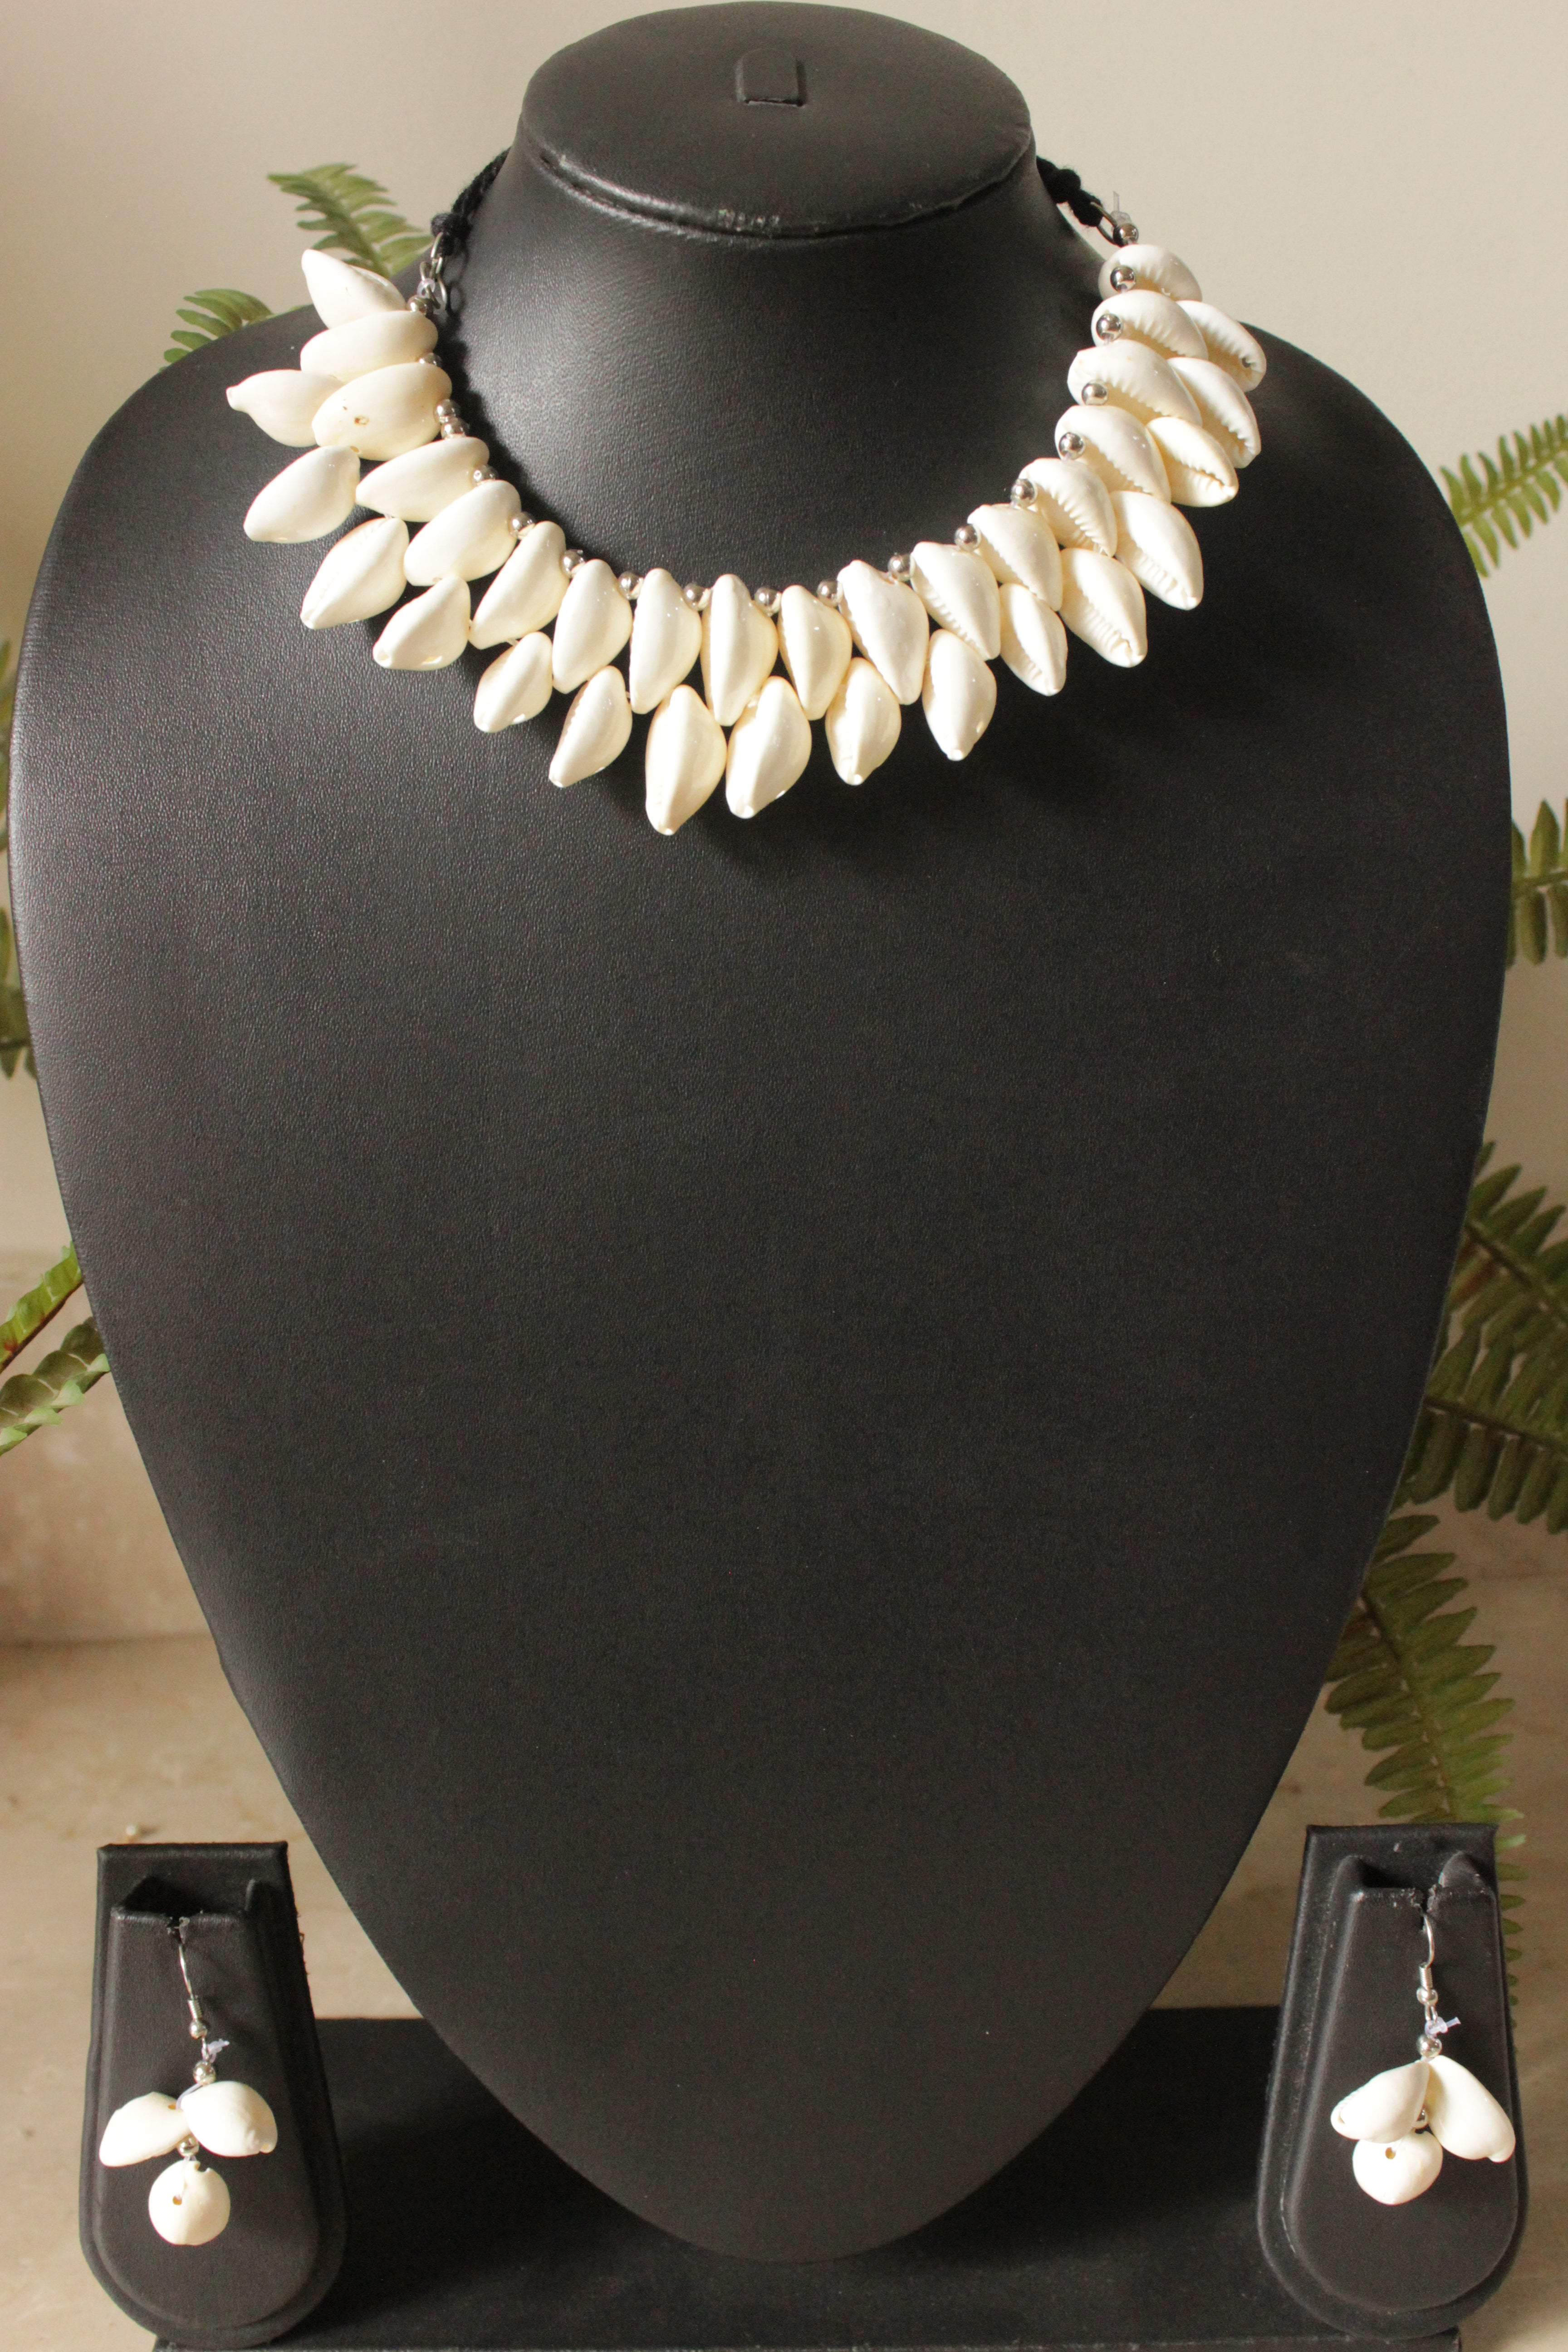 Shell Work Adjustable Closure Choker Necklace Set with Shell Earrings